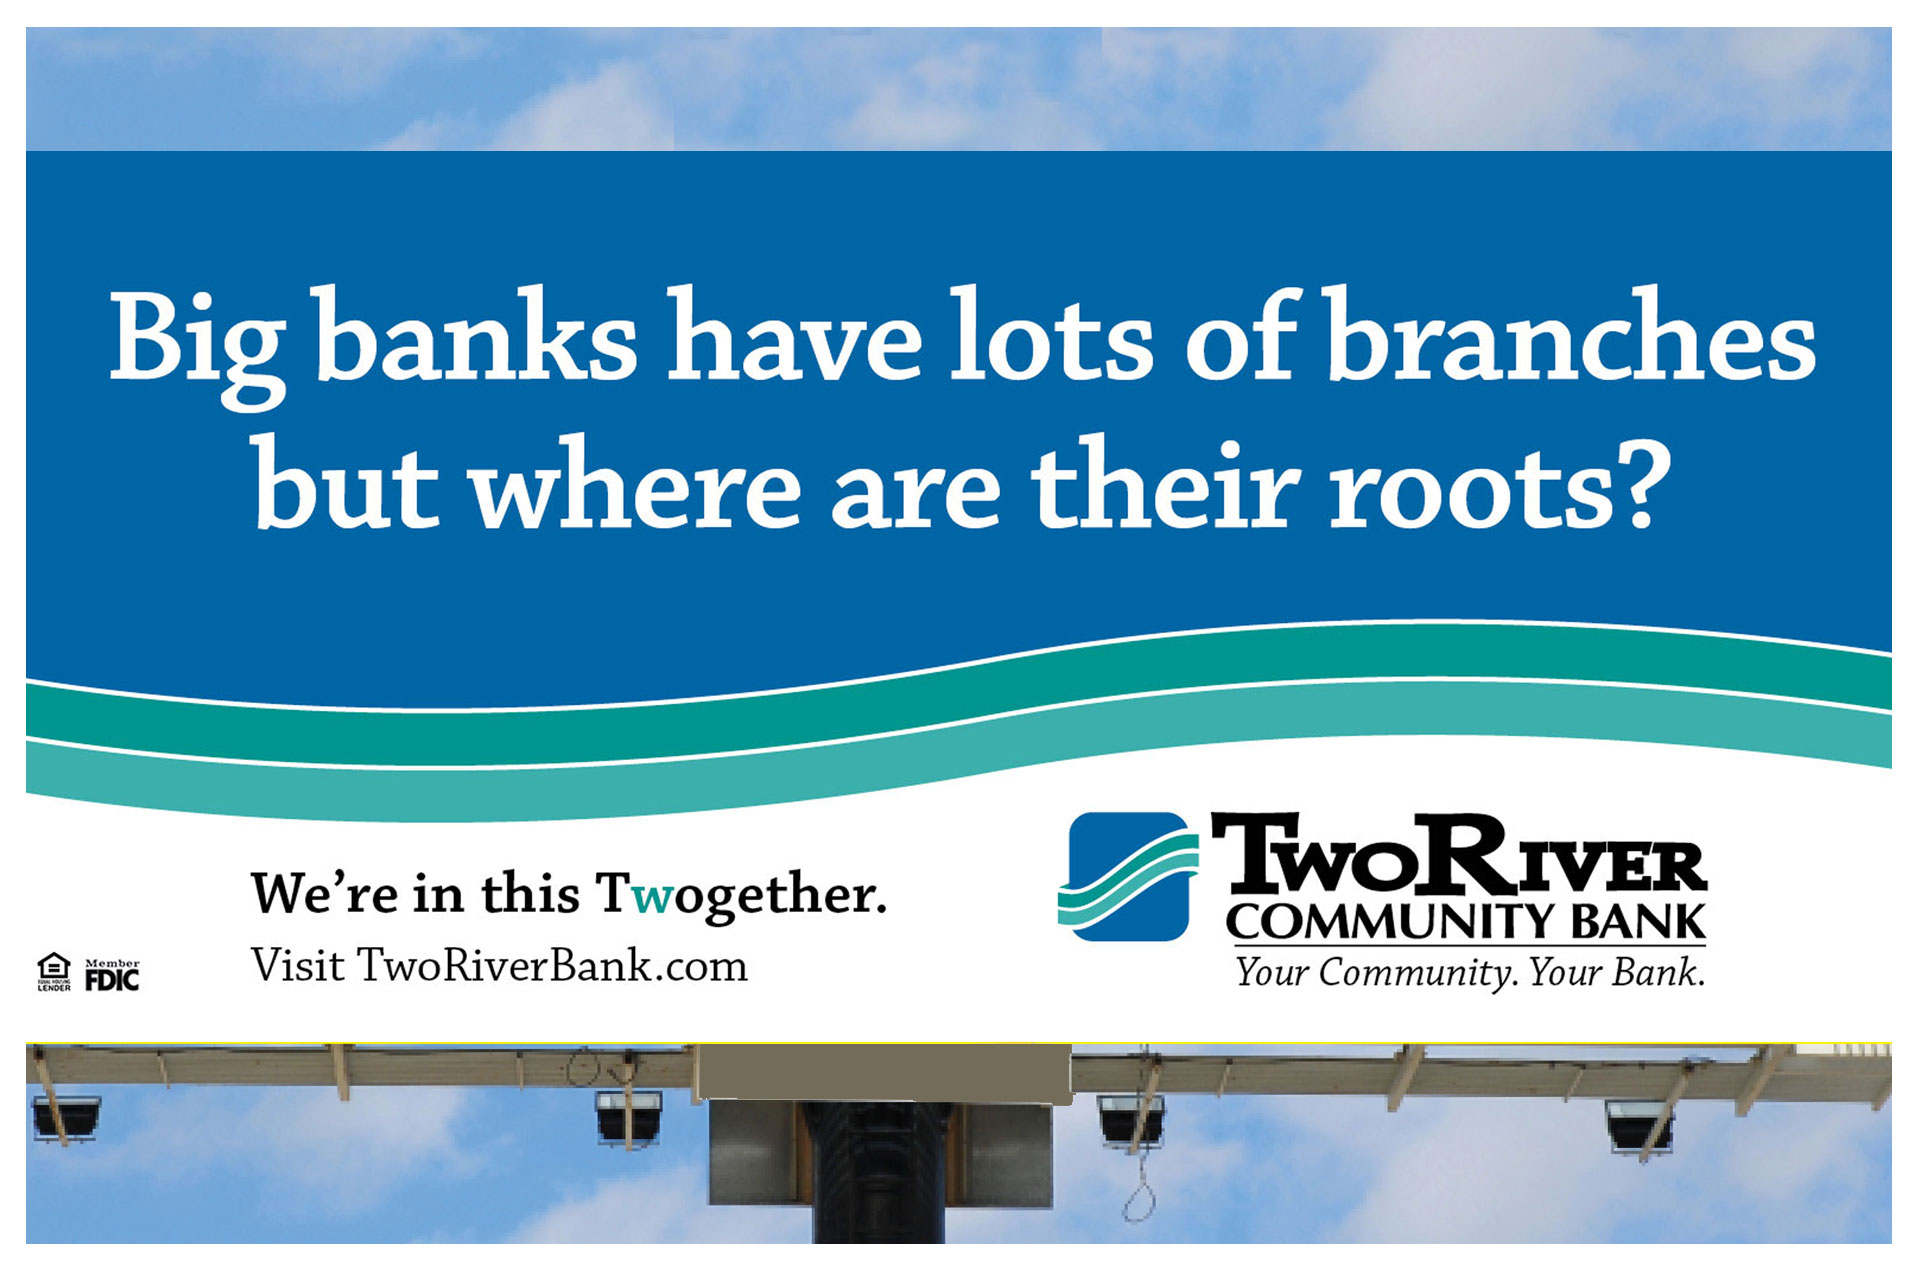 Billboard for Two River Cmmunity bank